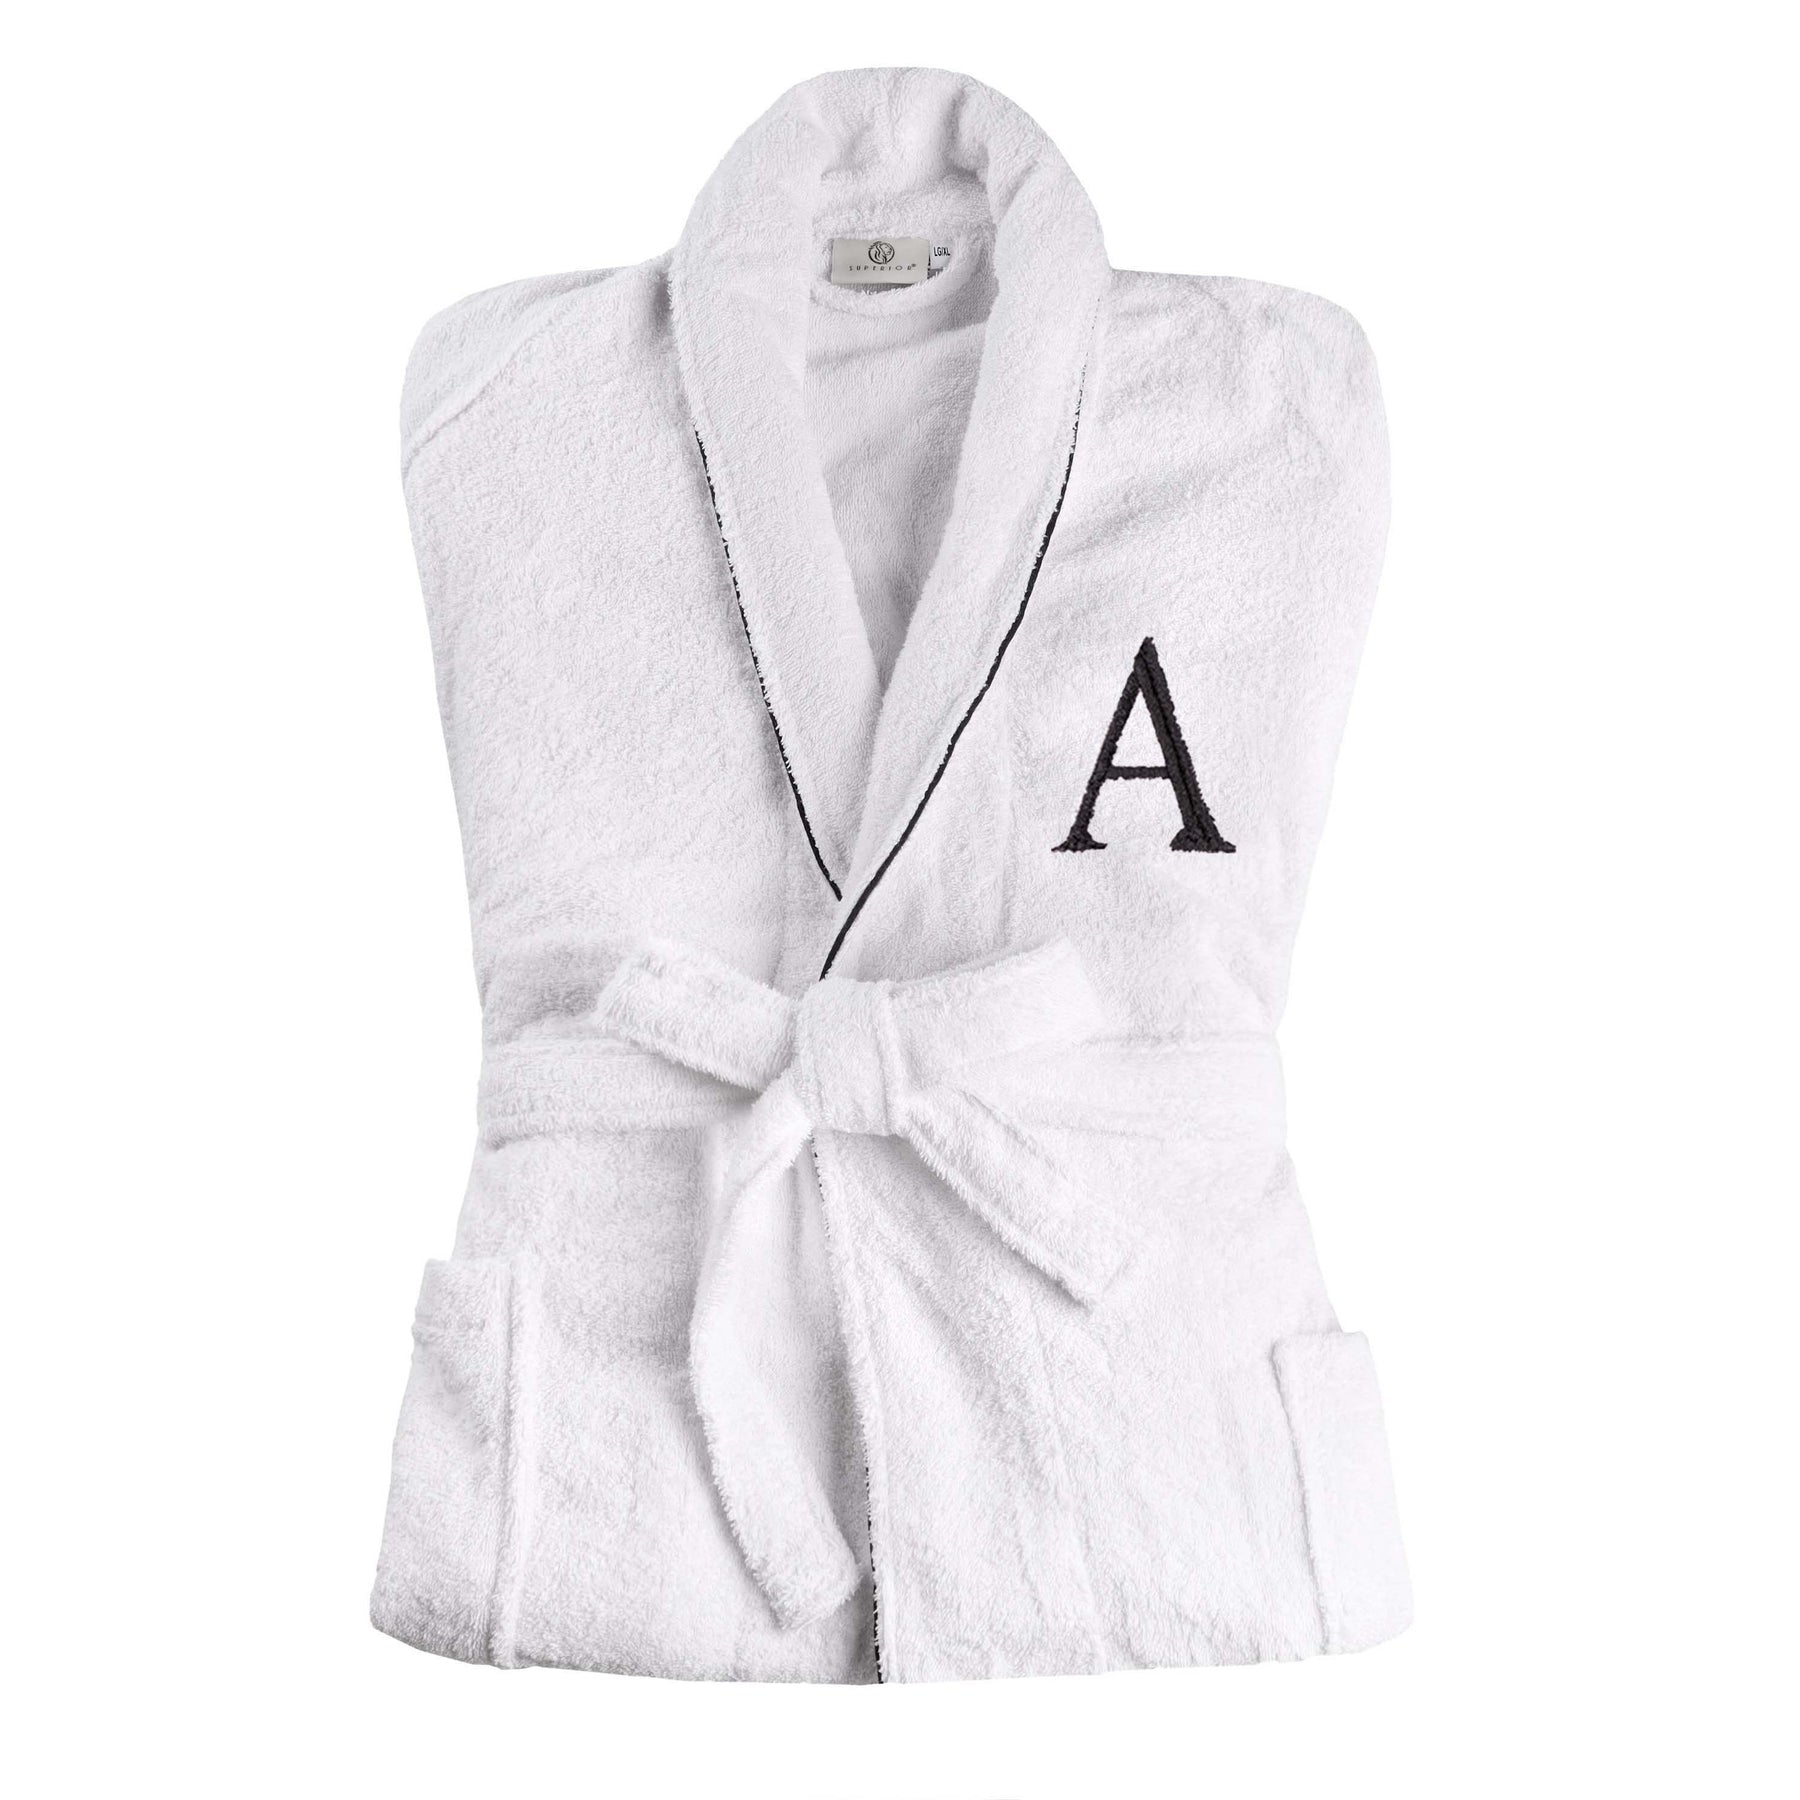 Cotton Adult Unisex Embroidered Fluffy Bathrobe White - Letter A